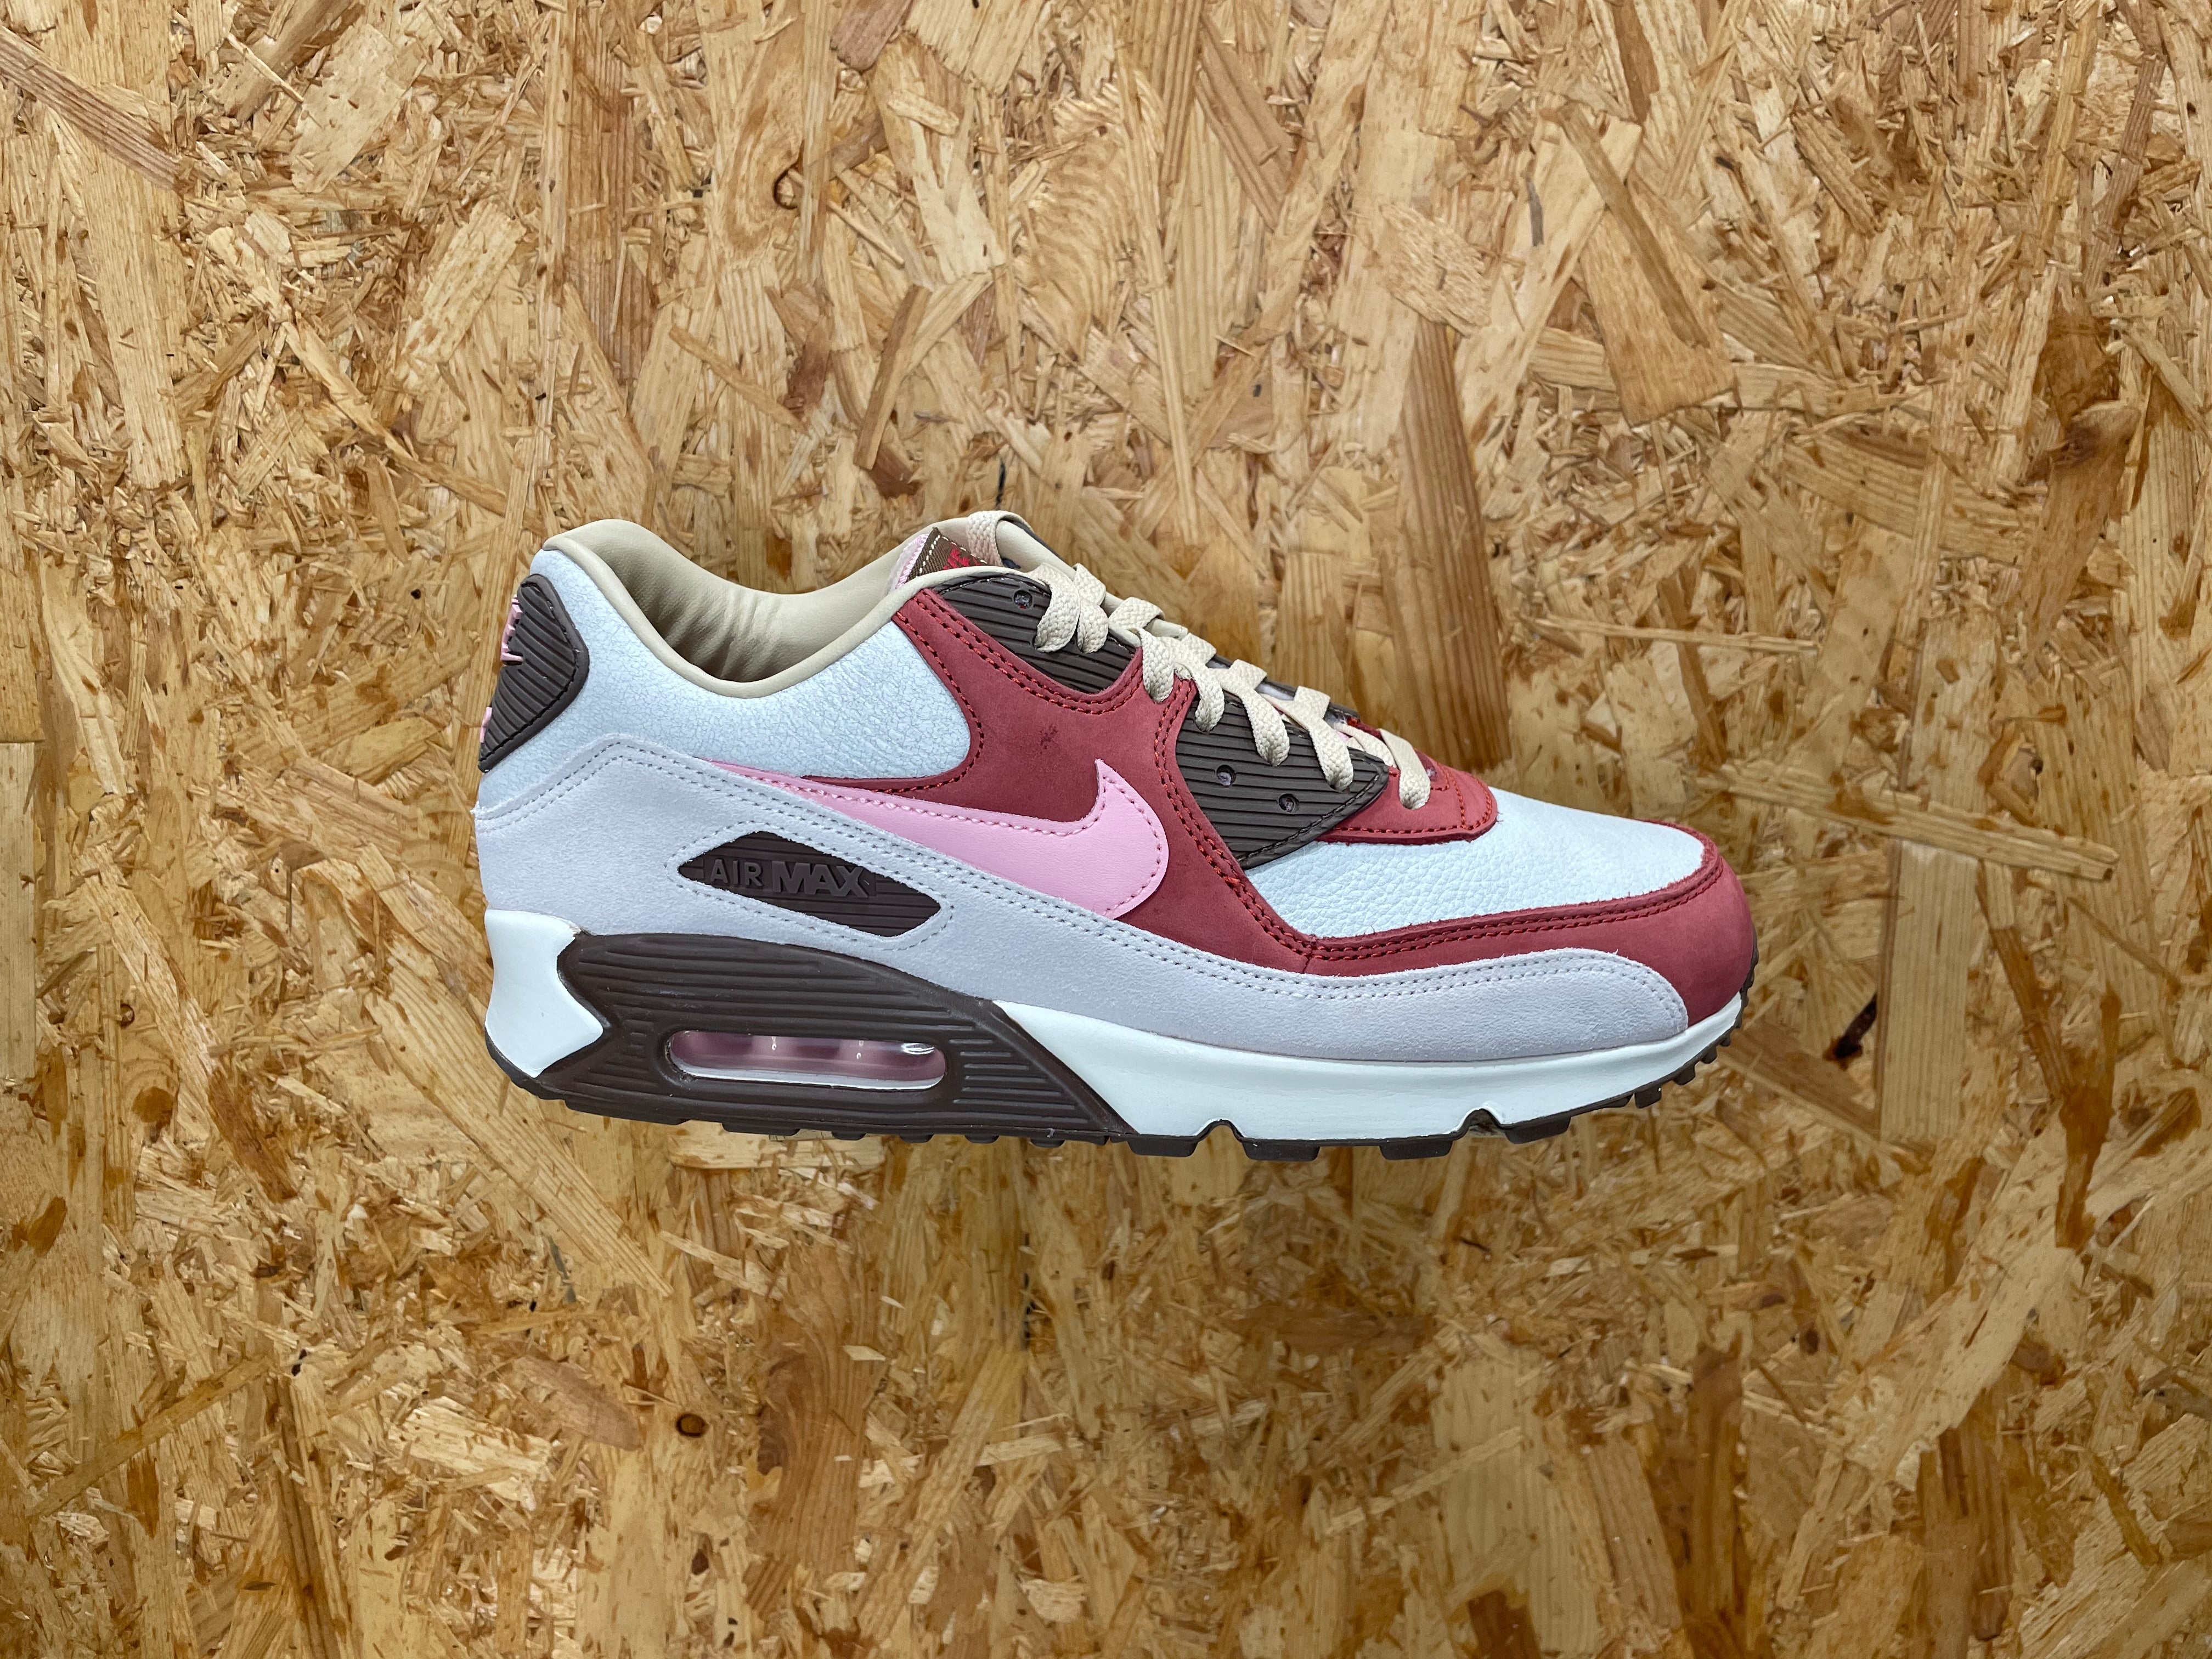 Nike DQM x Air Max 90 'Bacon' 2021 Mens Sneakers - Size 8.0